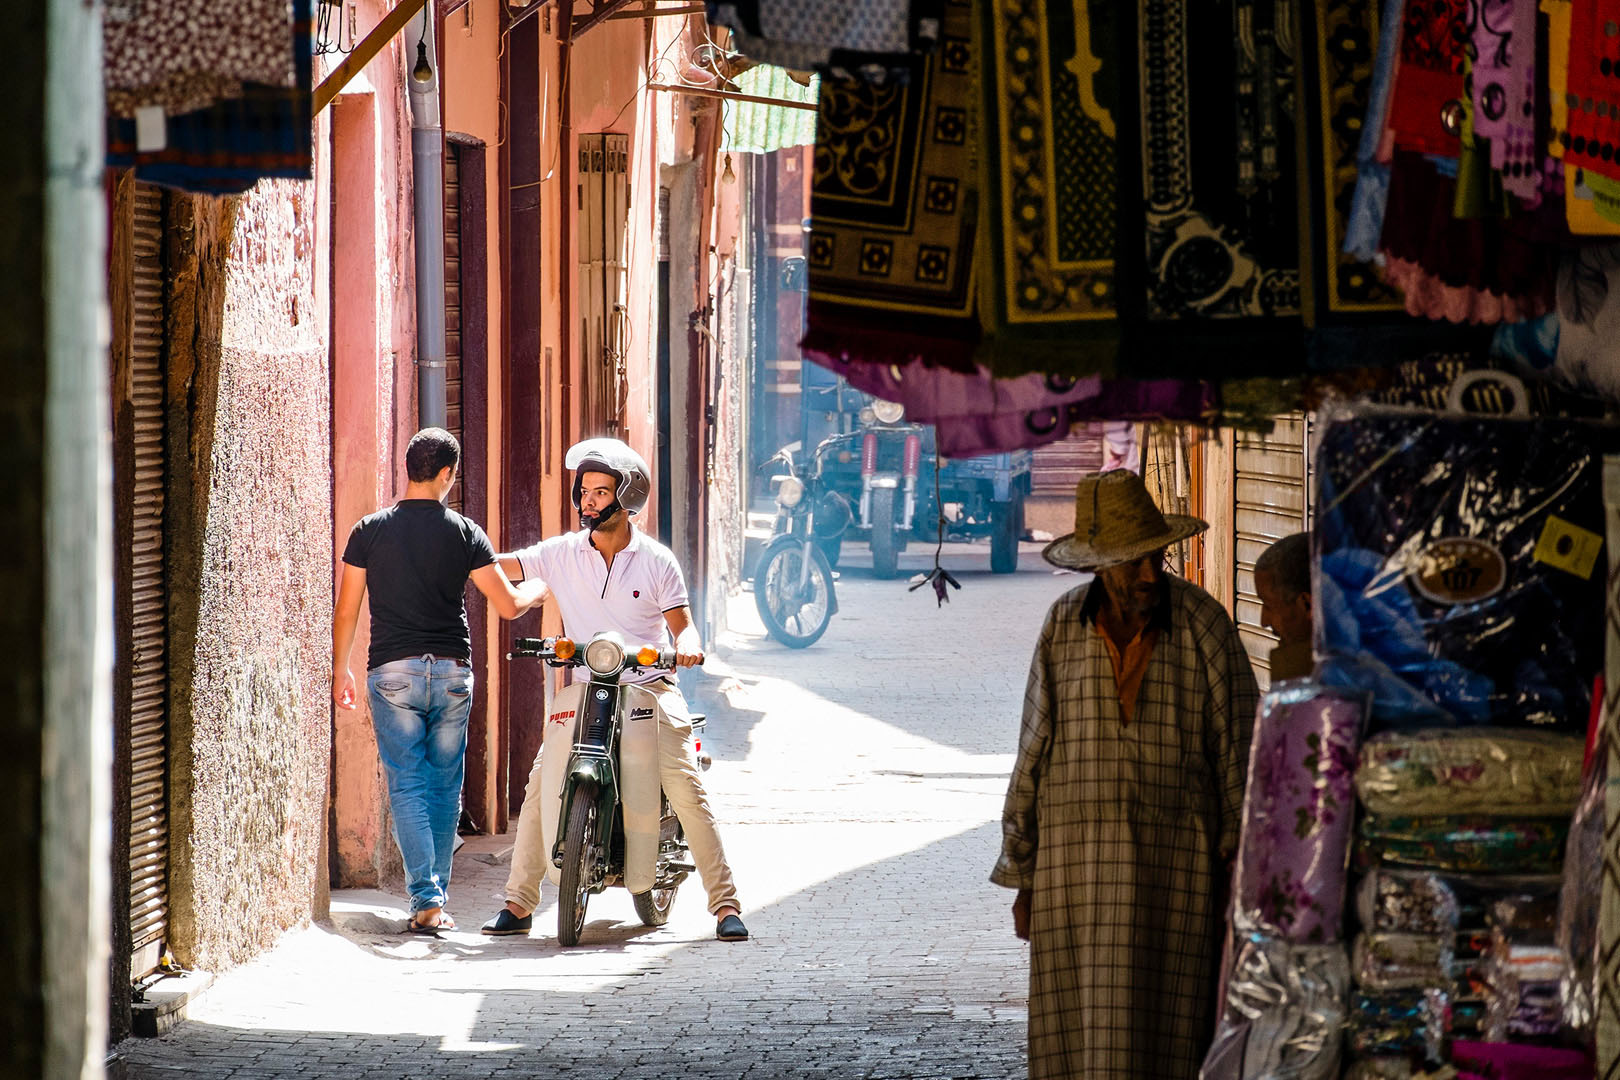 Conversation seated on a scooter in Marrakech Bazaar scene